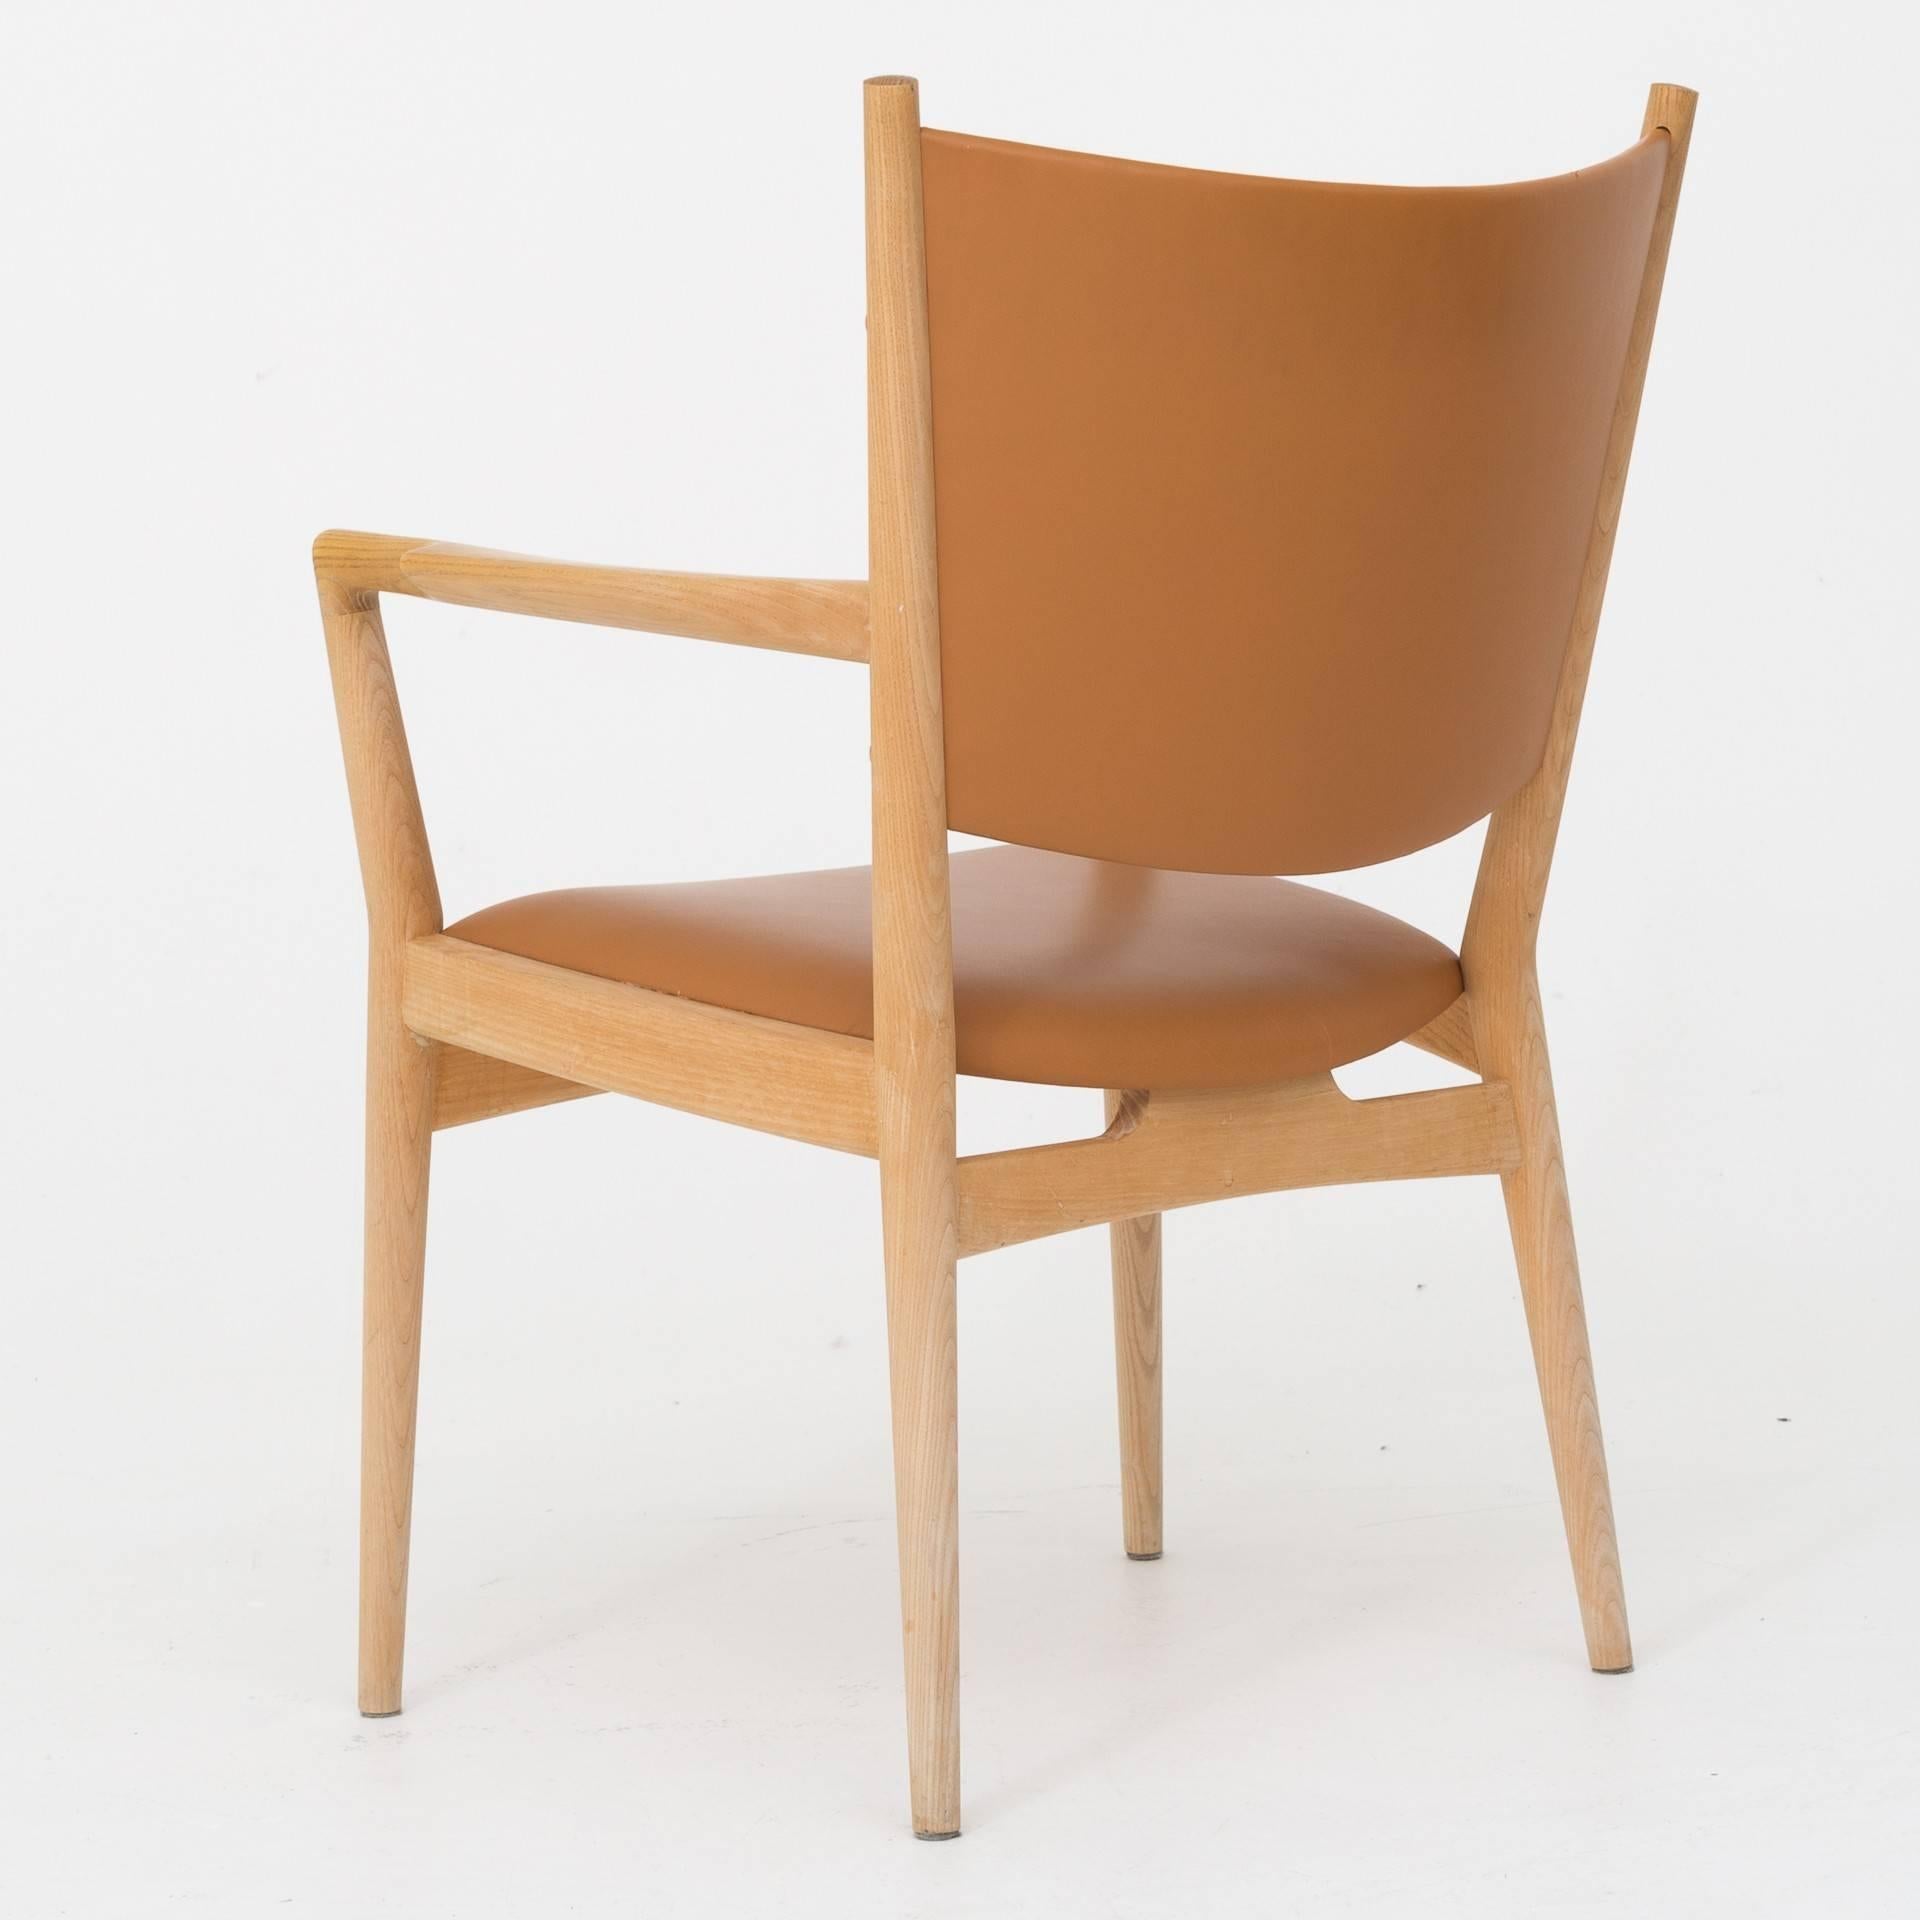 PP 240, armchair in ash with seat in brown leather. Maker PP furniture.